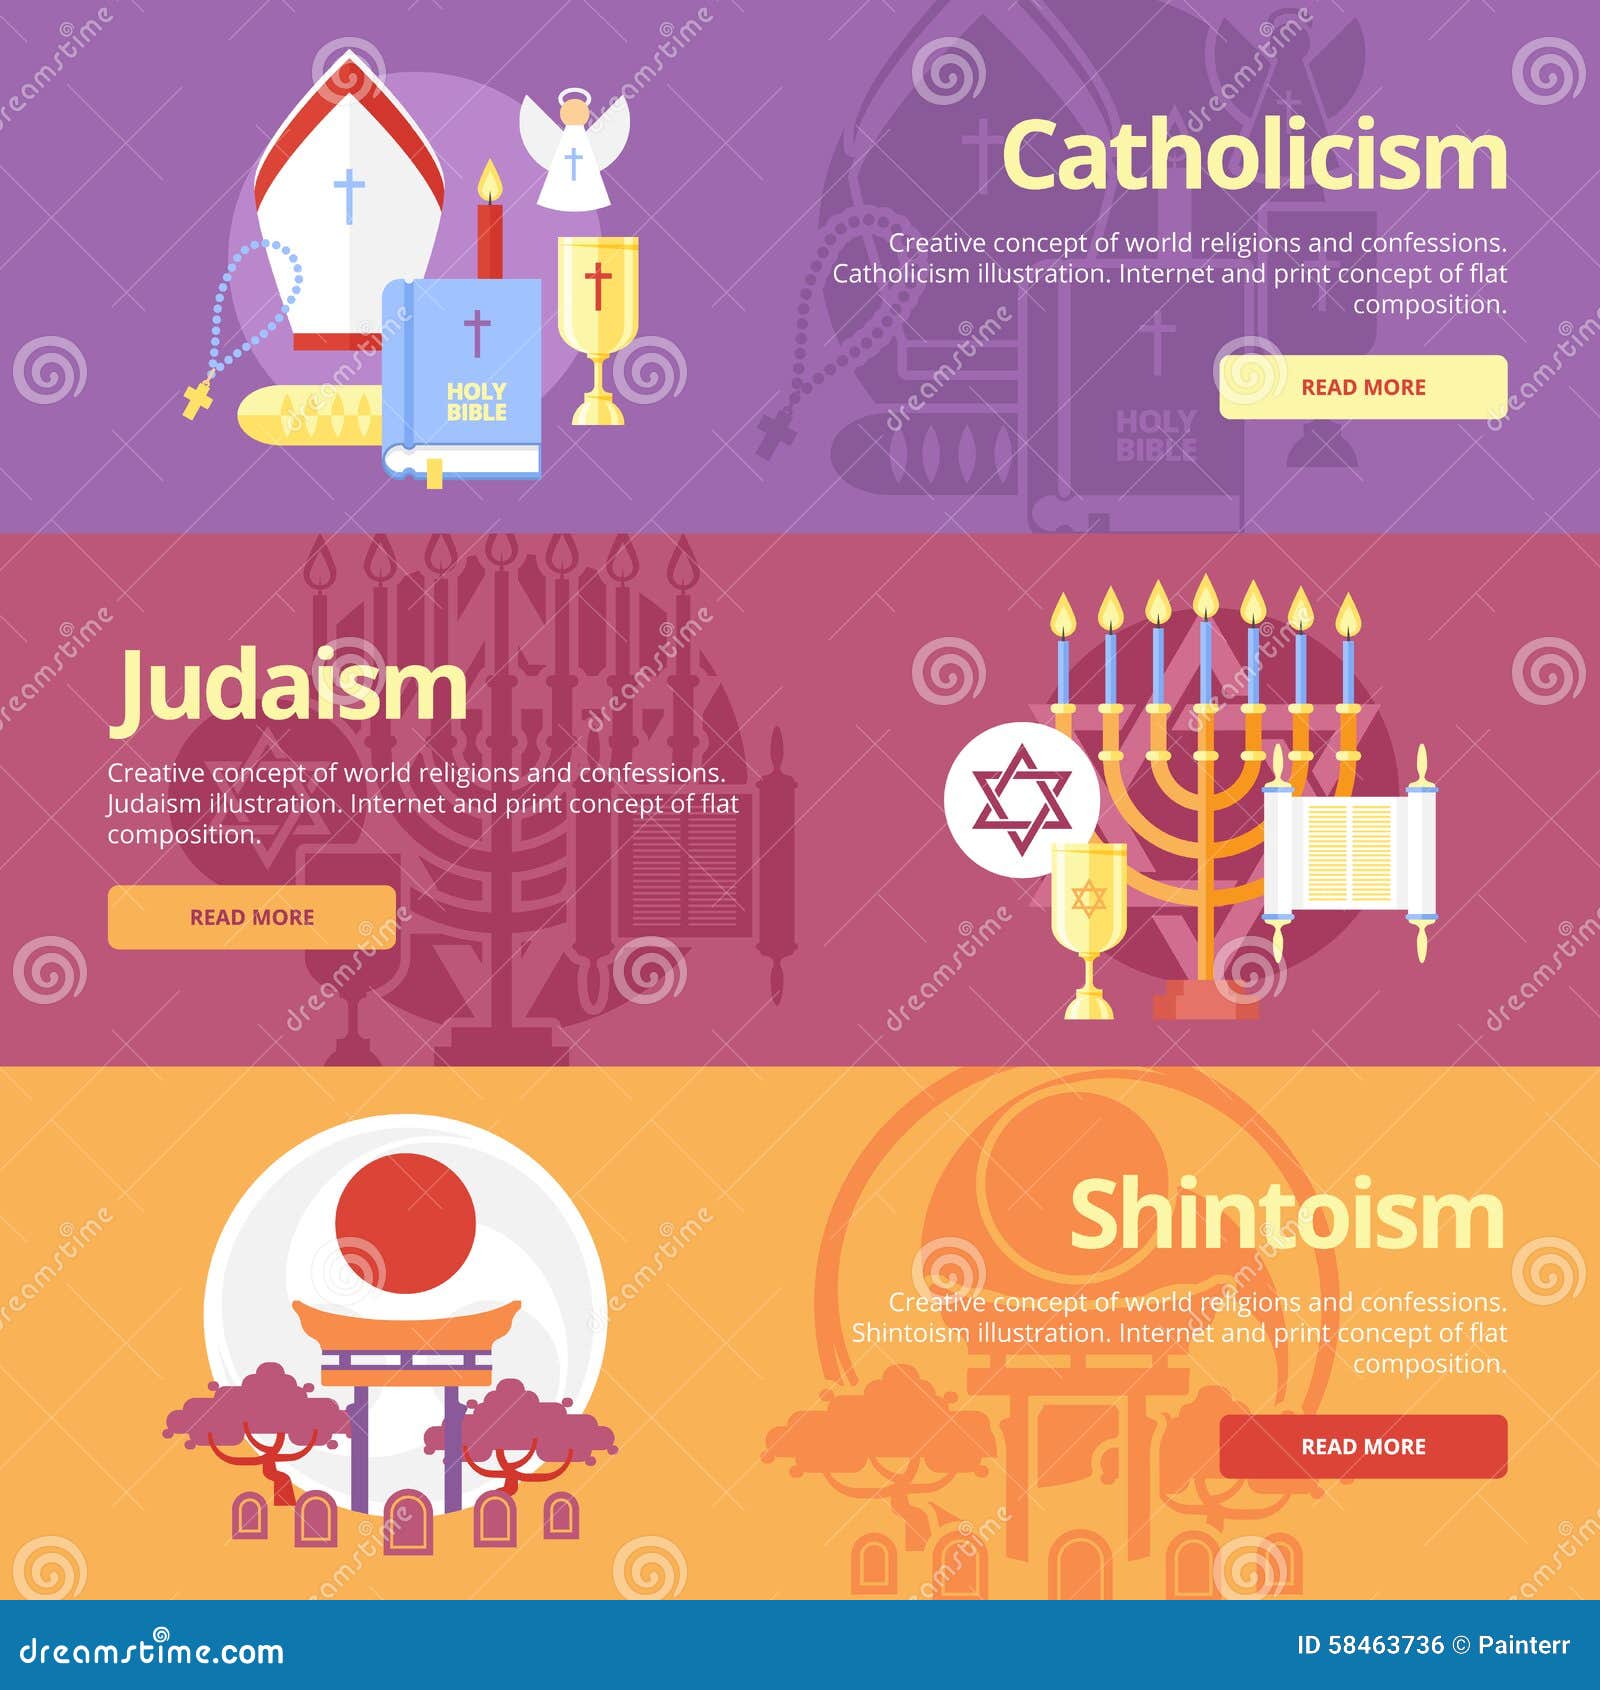 flat banner  for catholicism, judaism, shintoism. religion  for web banners and print materials.